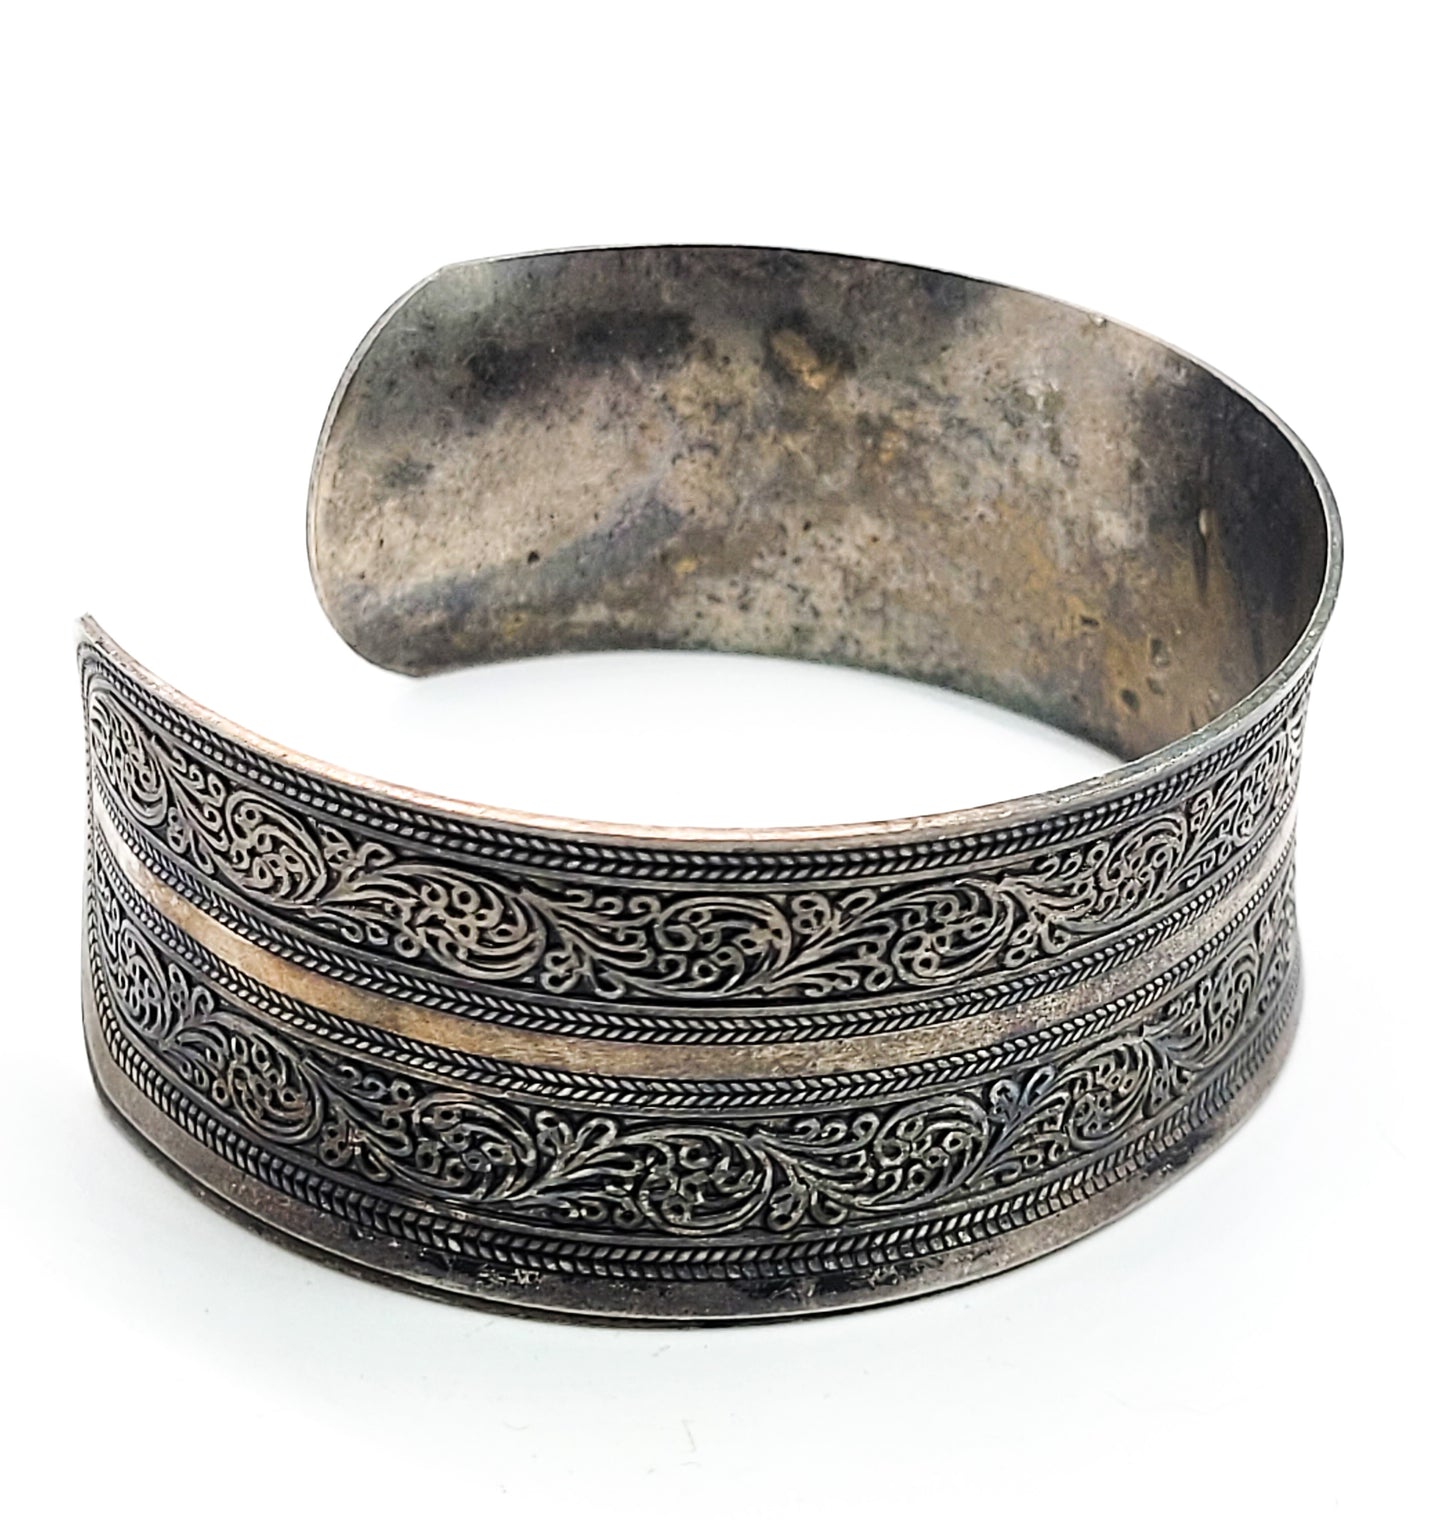 Silver plated Stamped paisley vintage cuff bracelet